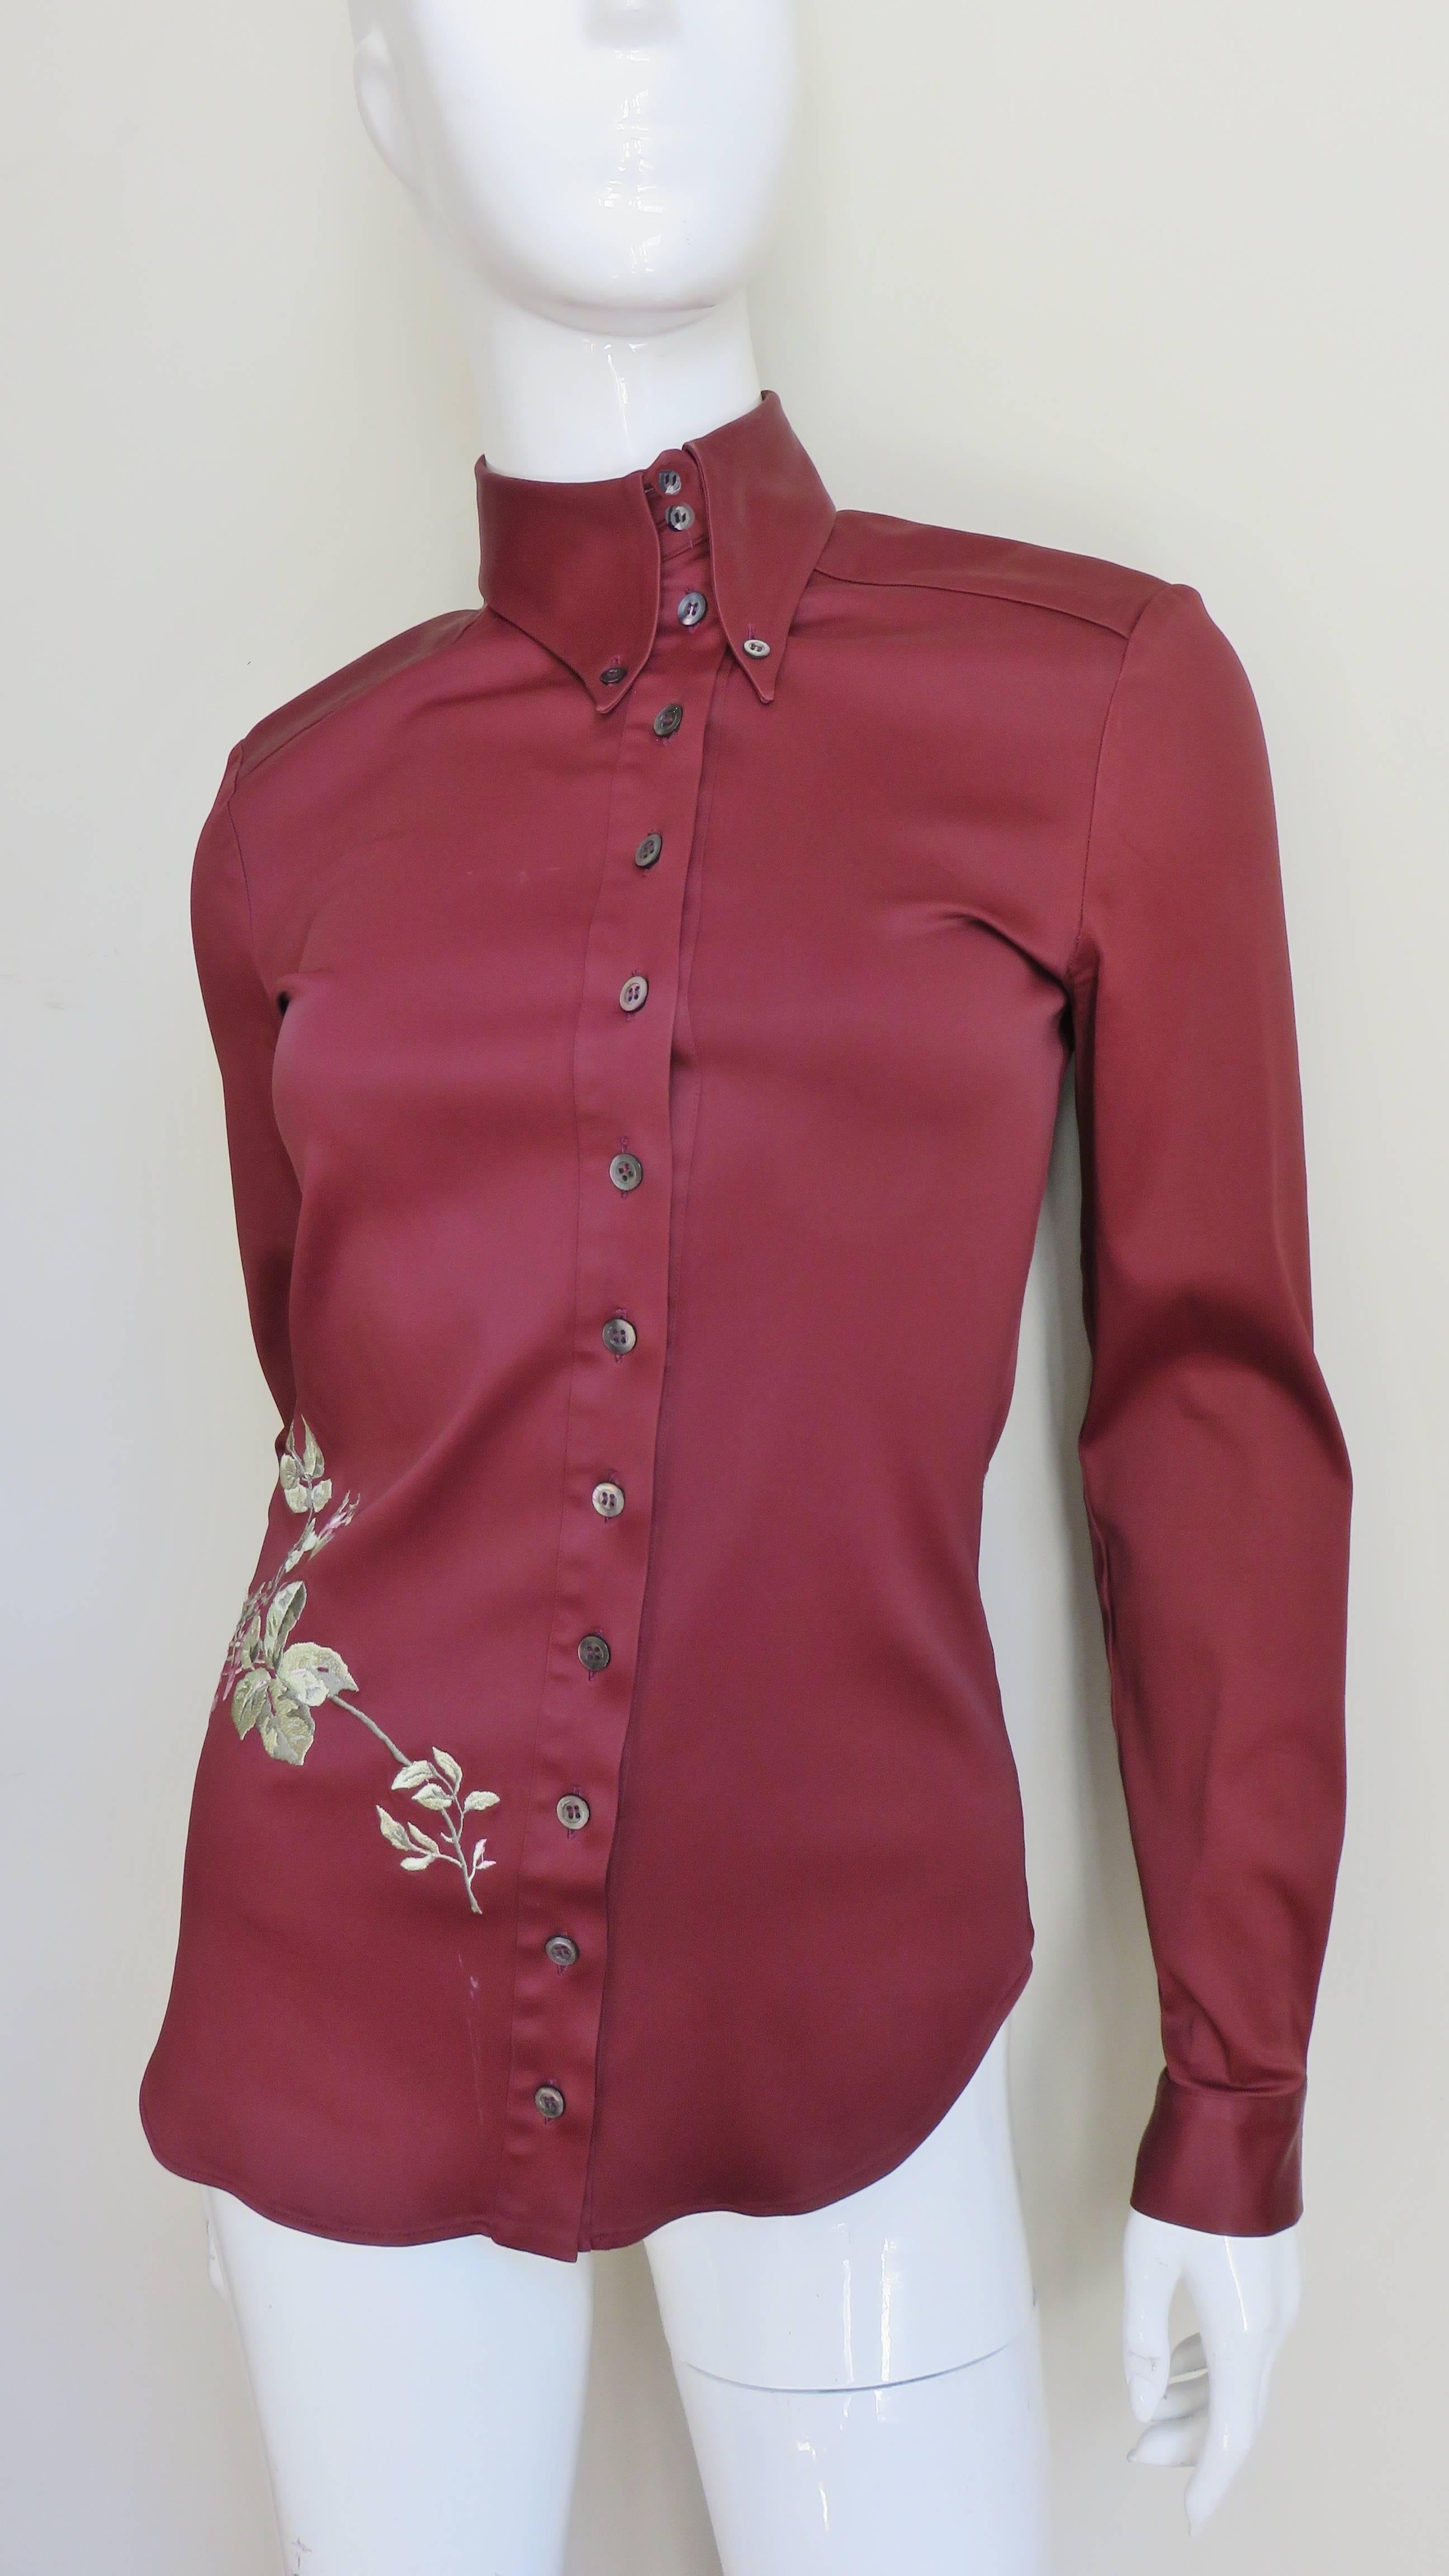 A beautiful wine stretch shirt by Alexander McQueen.  It is fitted with a shirt tail hem and a high button down shirt collar.  The  center is highlighted with beautiful, intricate, embroidered roses and leaves starting at the front of one hip